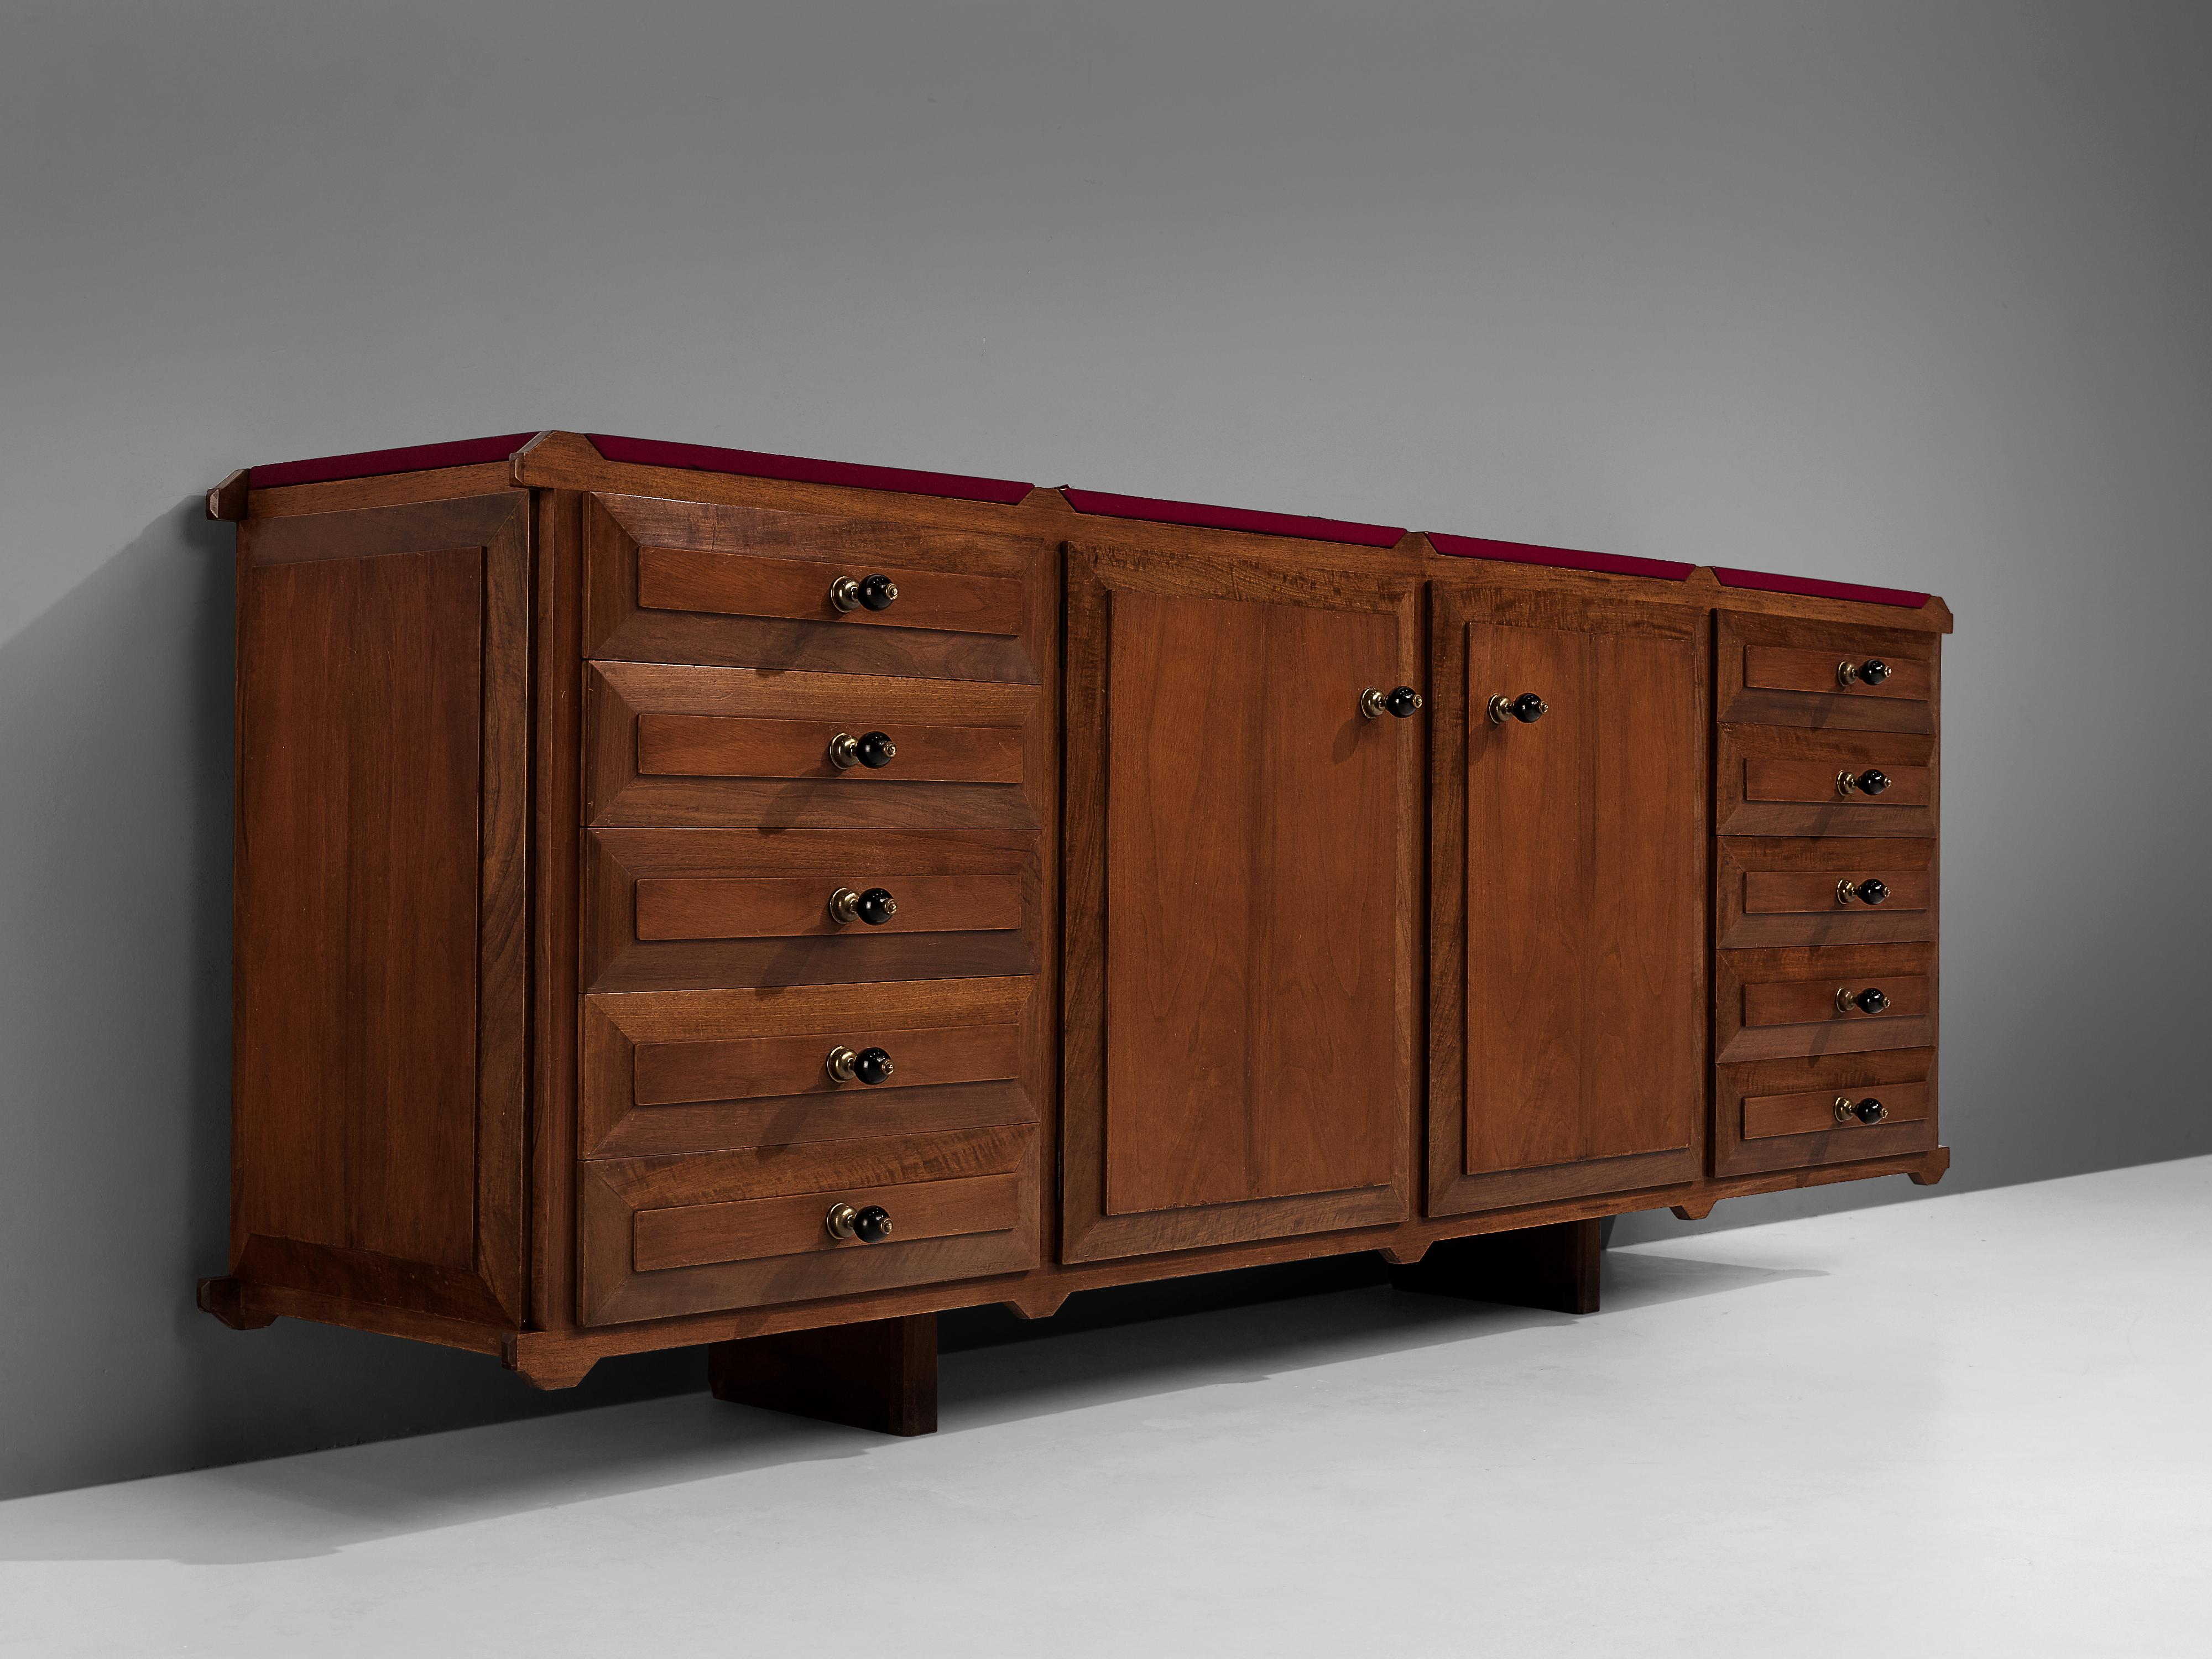 Italian Sideboard with Drawers in Walnut with Brass Handles 4